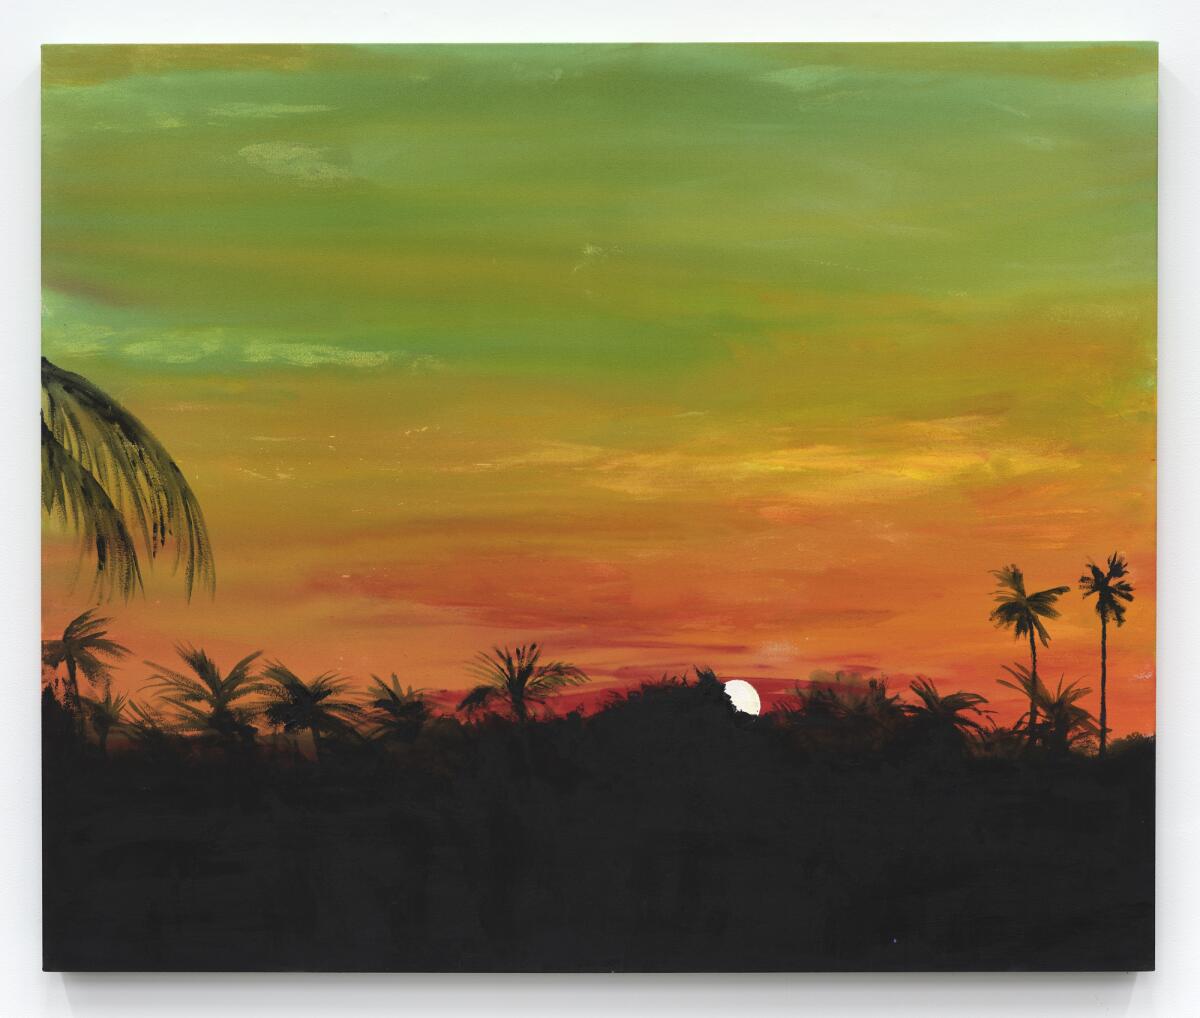 A sunset of orange and green emerges from the silhouettes of palm trees.